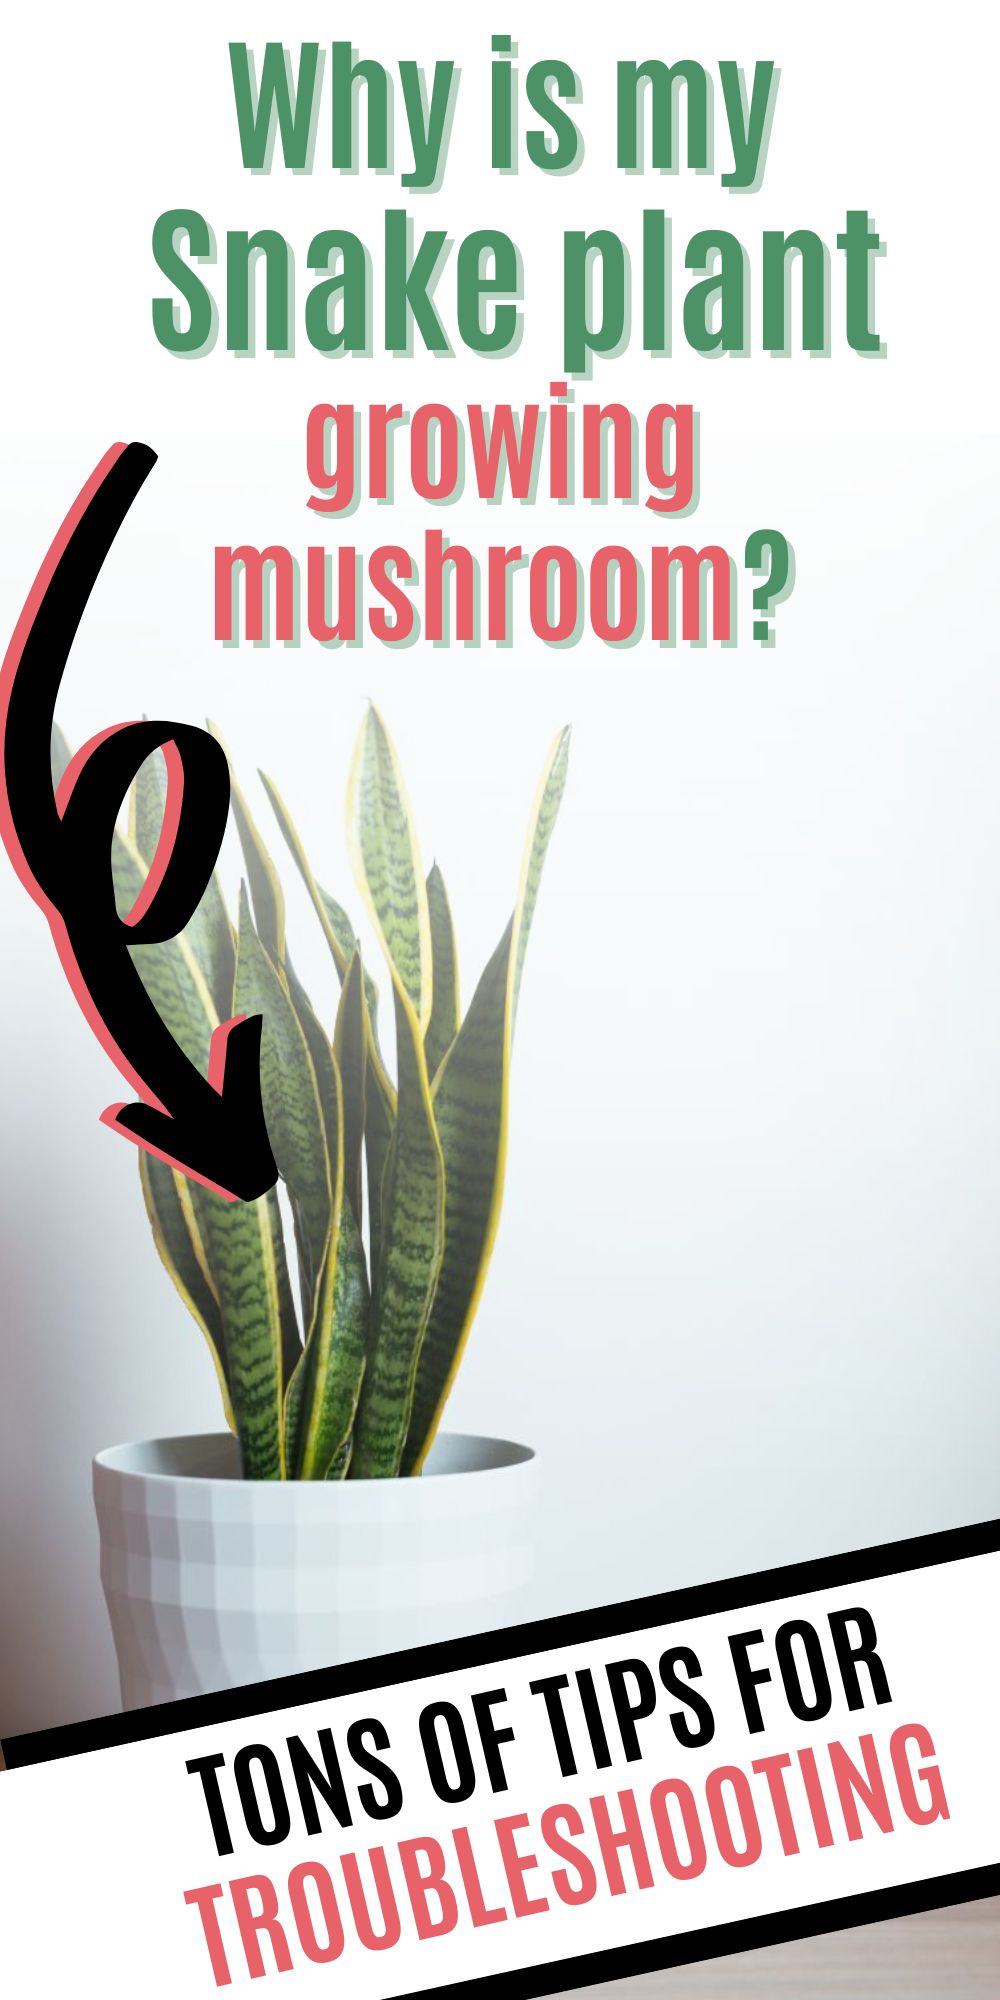 Why is snake plant growing mushrooms?